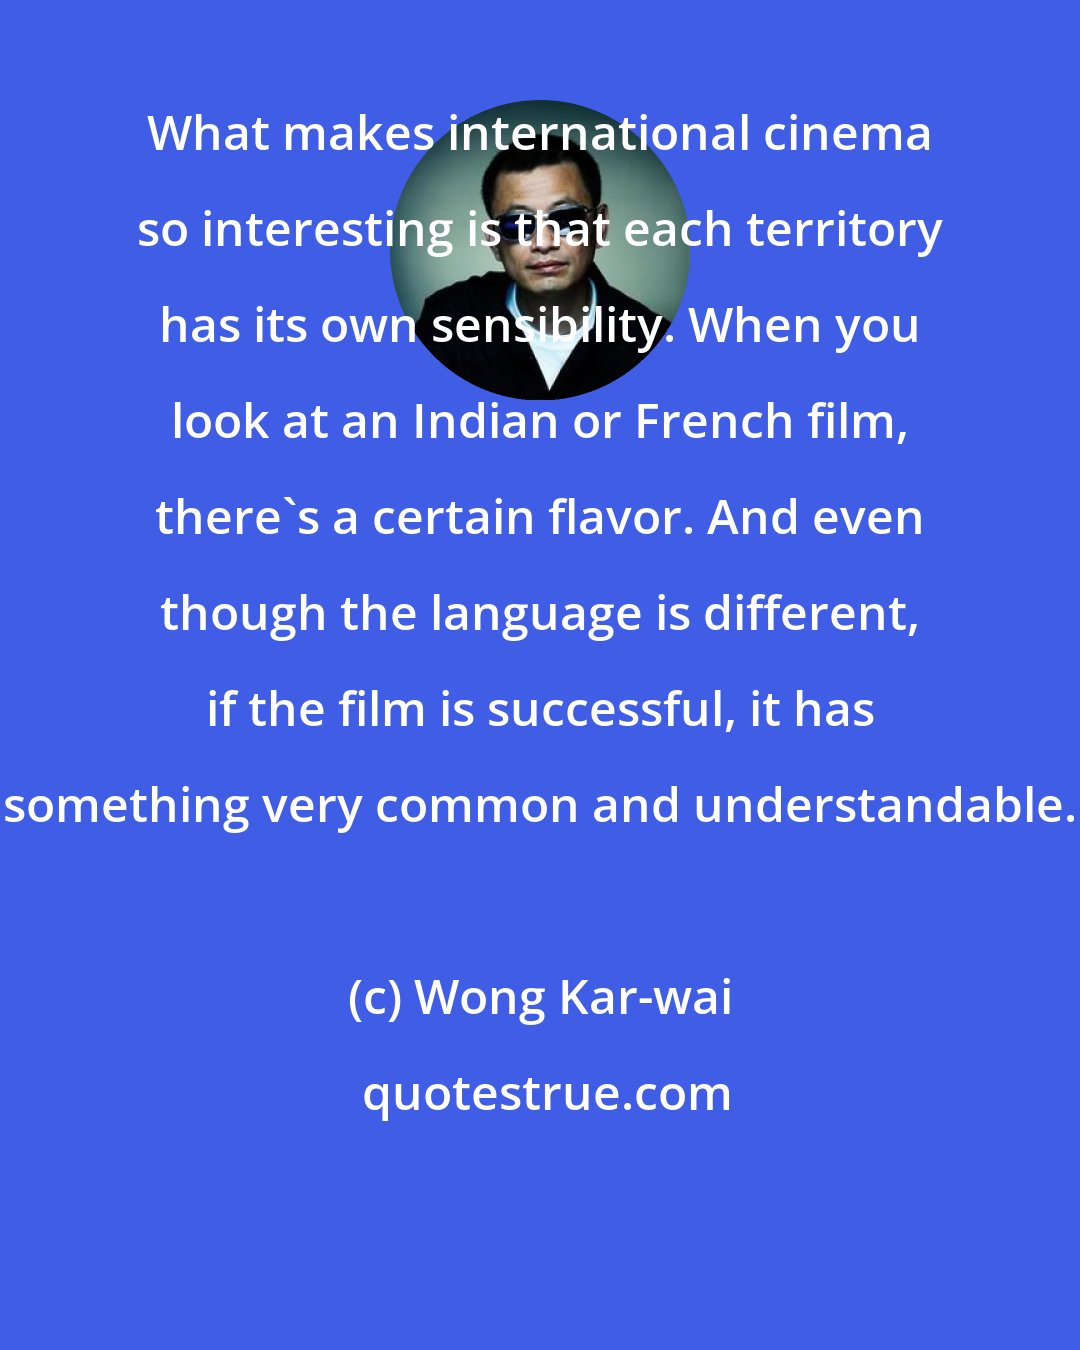 Wong Kar-wai: What makes international cinema so interesting is that each territory has its own sensibility. When you look at an Indian or French film, there's a certain flavor. And even though the language is different, if the film is successful, it has something very common and understandable.